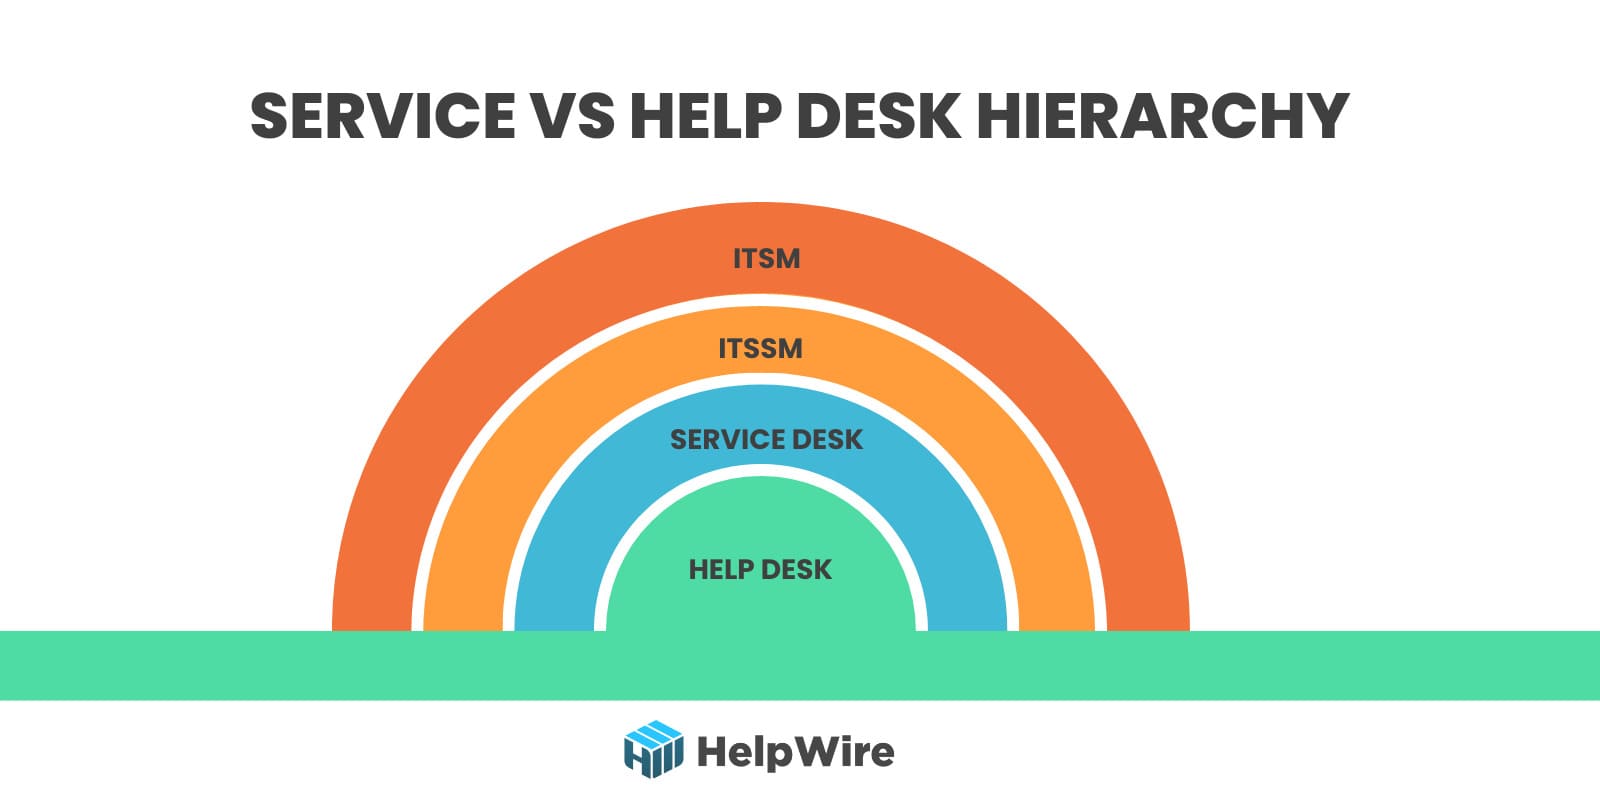 Help desk vs Service desk: what’s the difference?